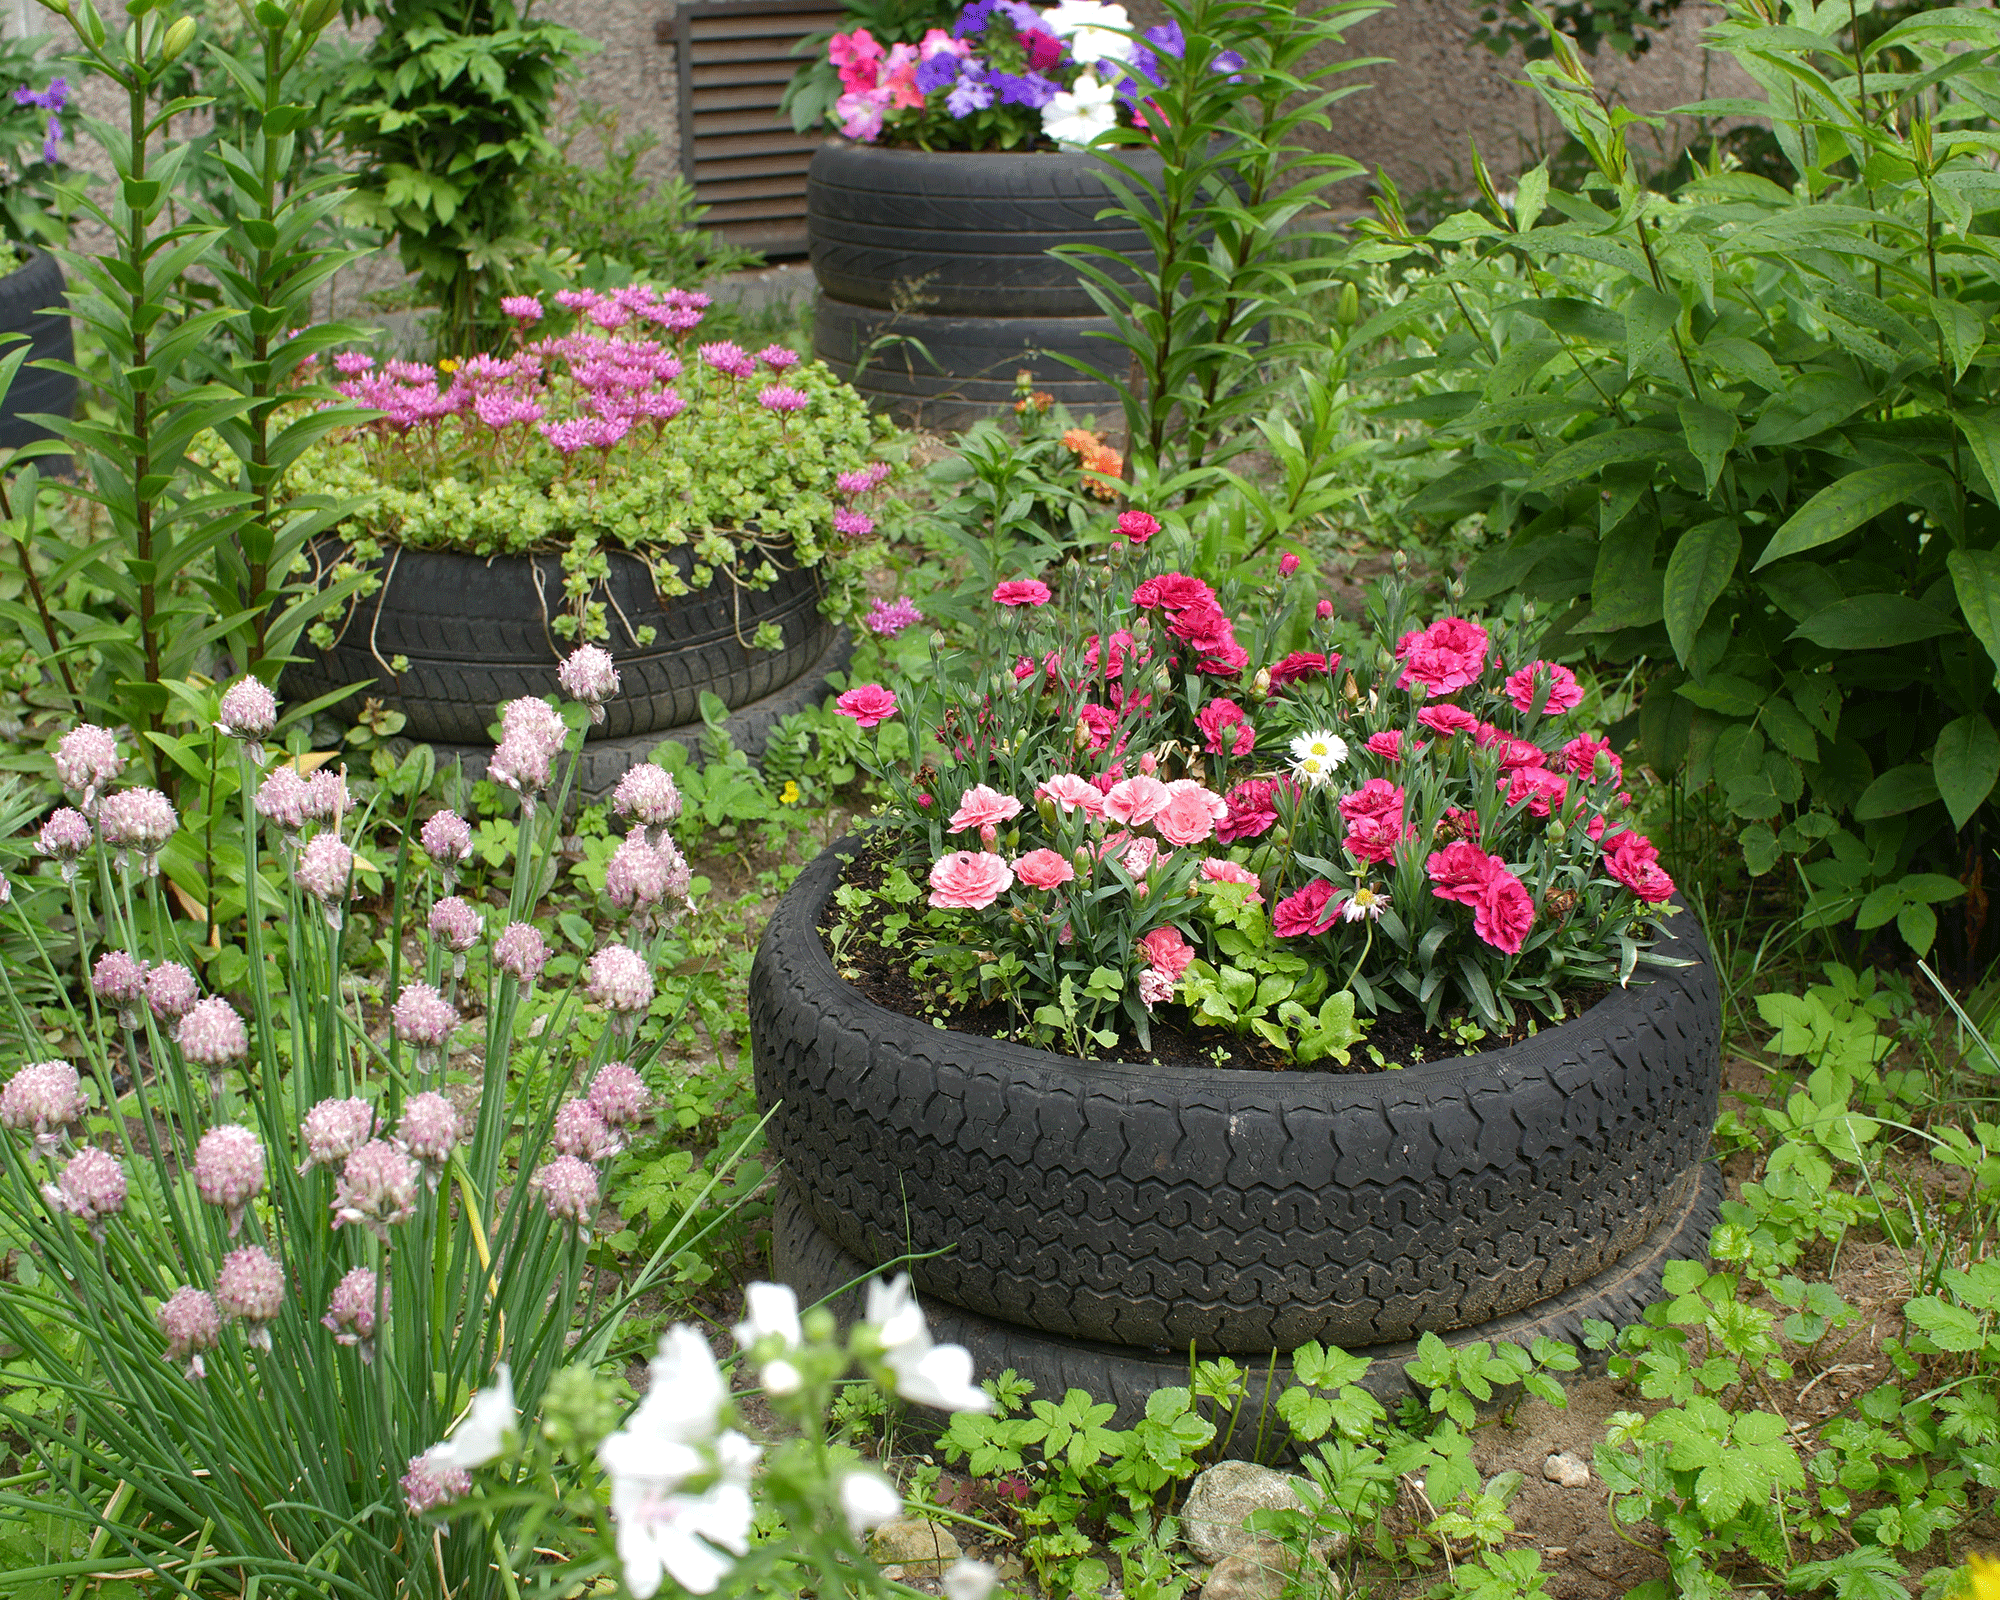 Rubber automobile tyres used as planters to house a variety of outdoor flowers and plants